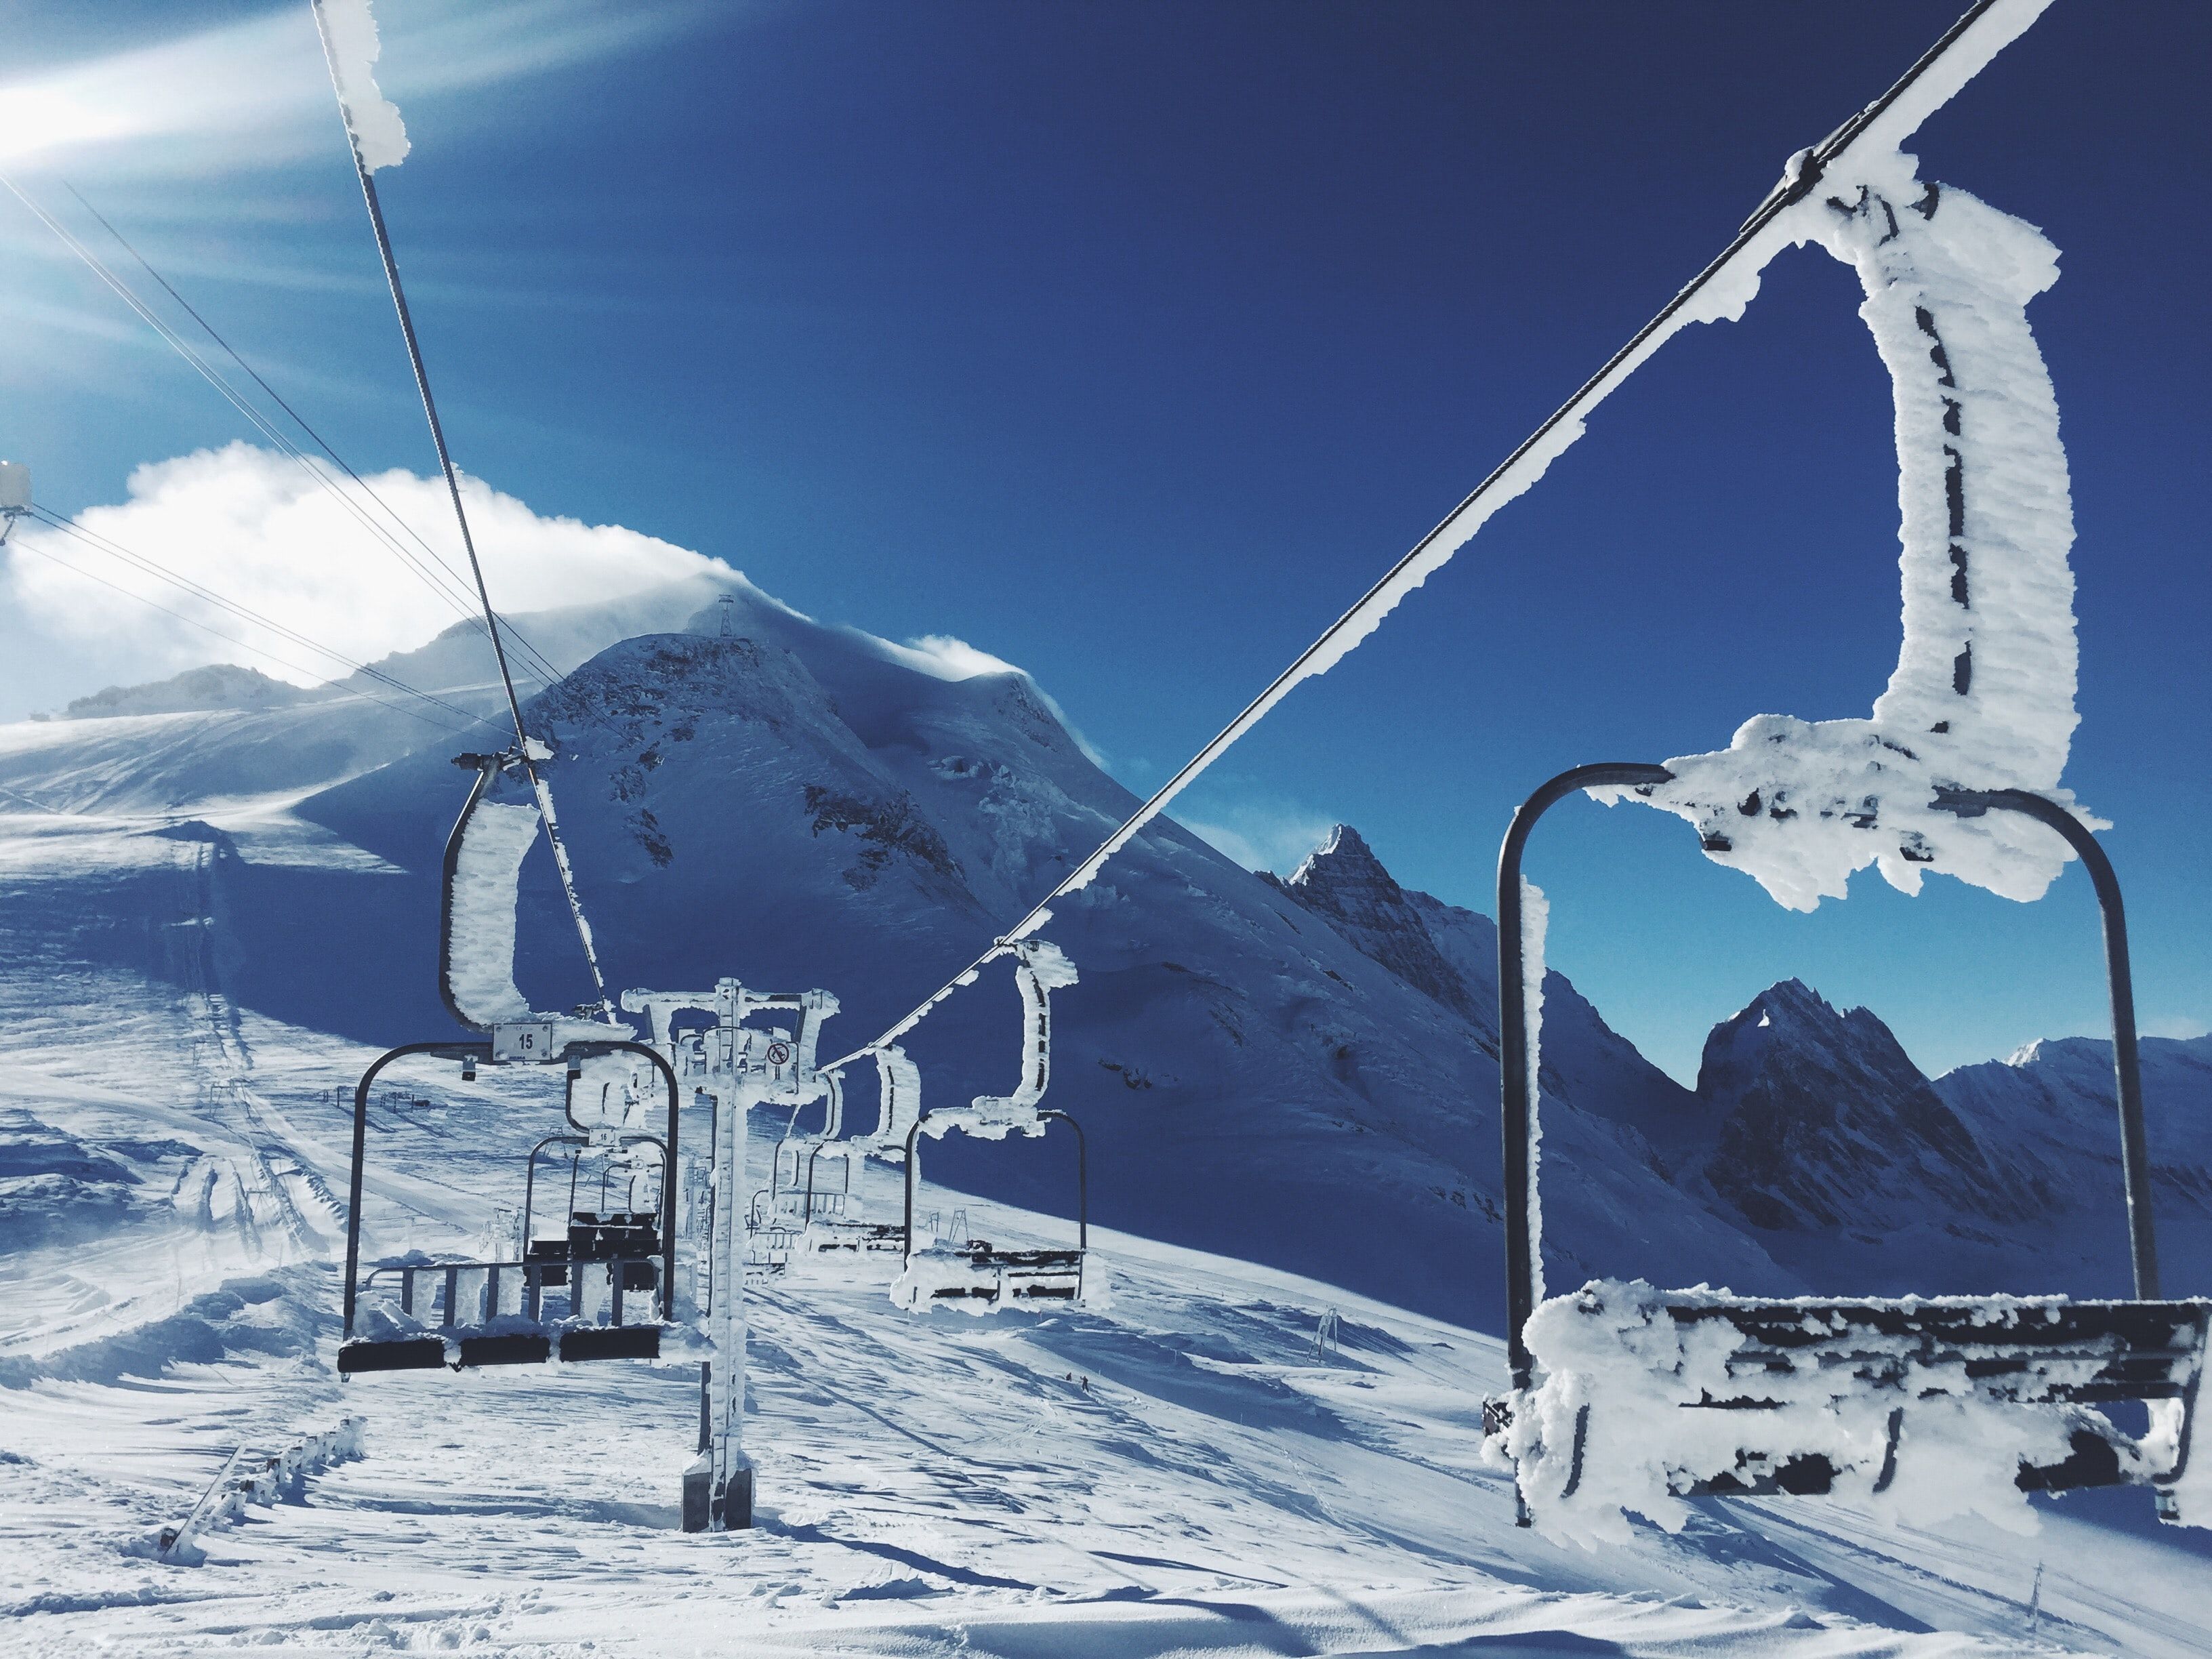 Tignes 4K wallpaper for your desktop or mobile screen free and easy to download